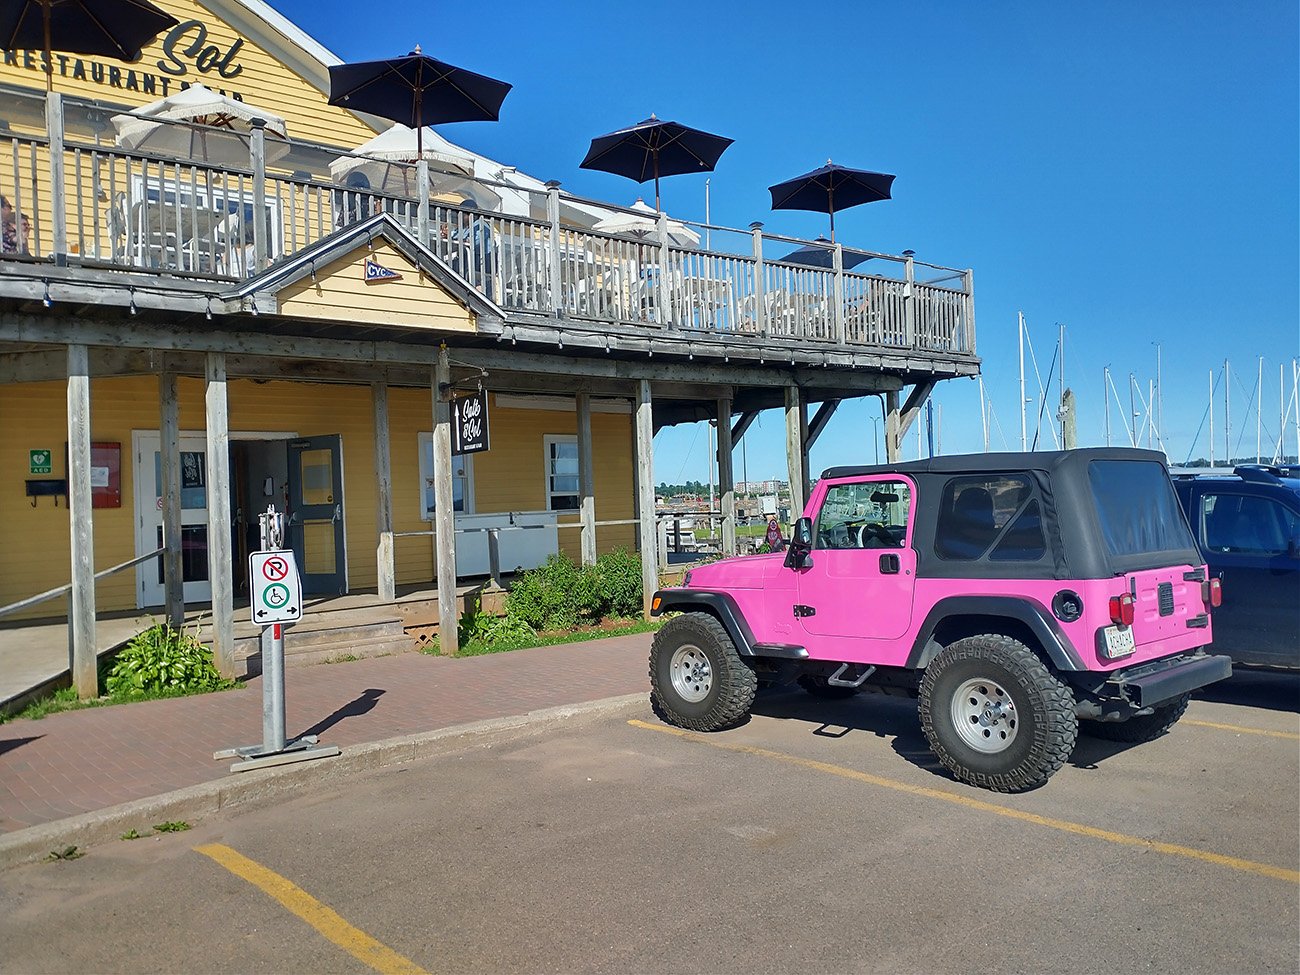 Saw a couple of these pink vehicles on the island.